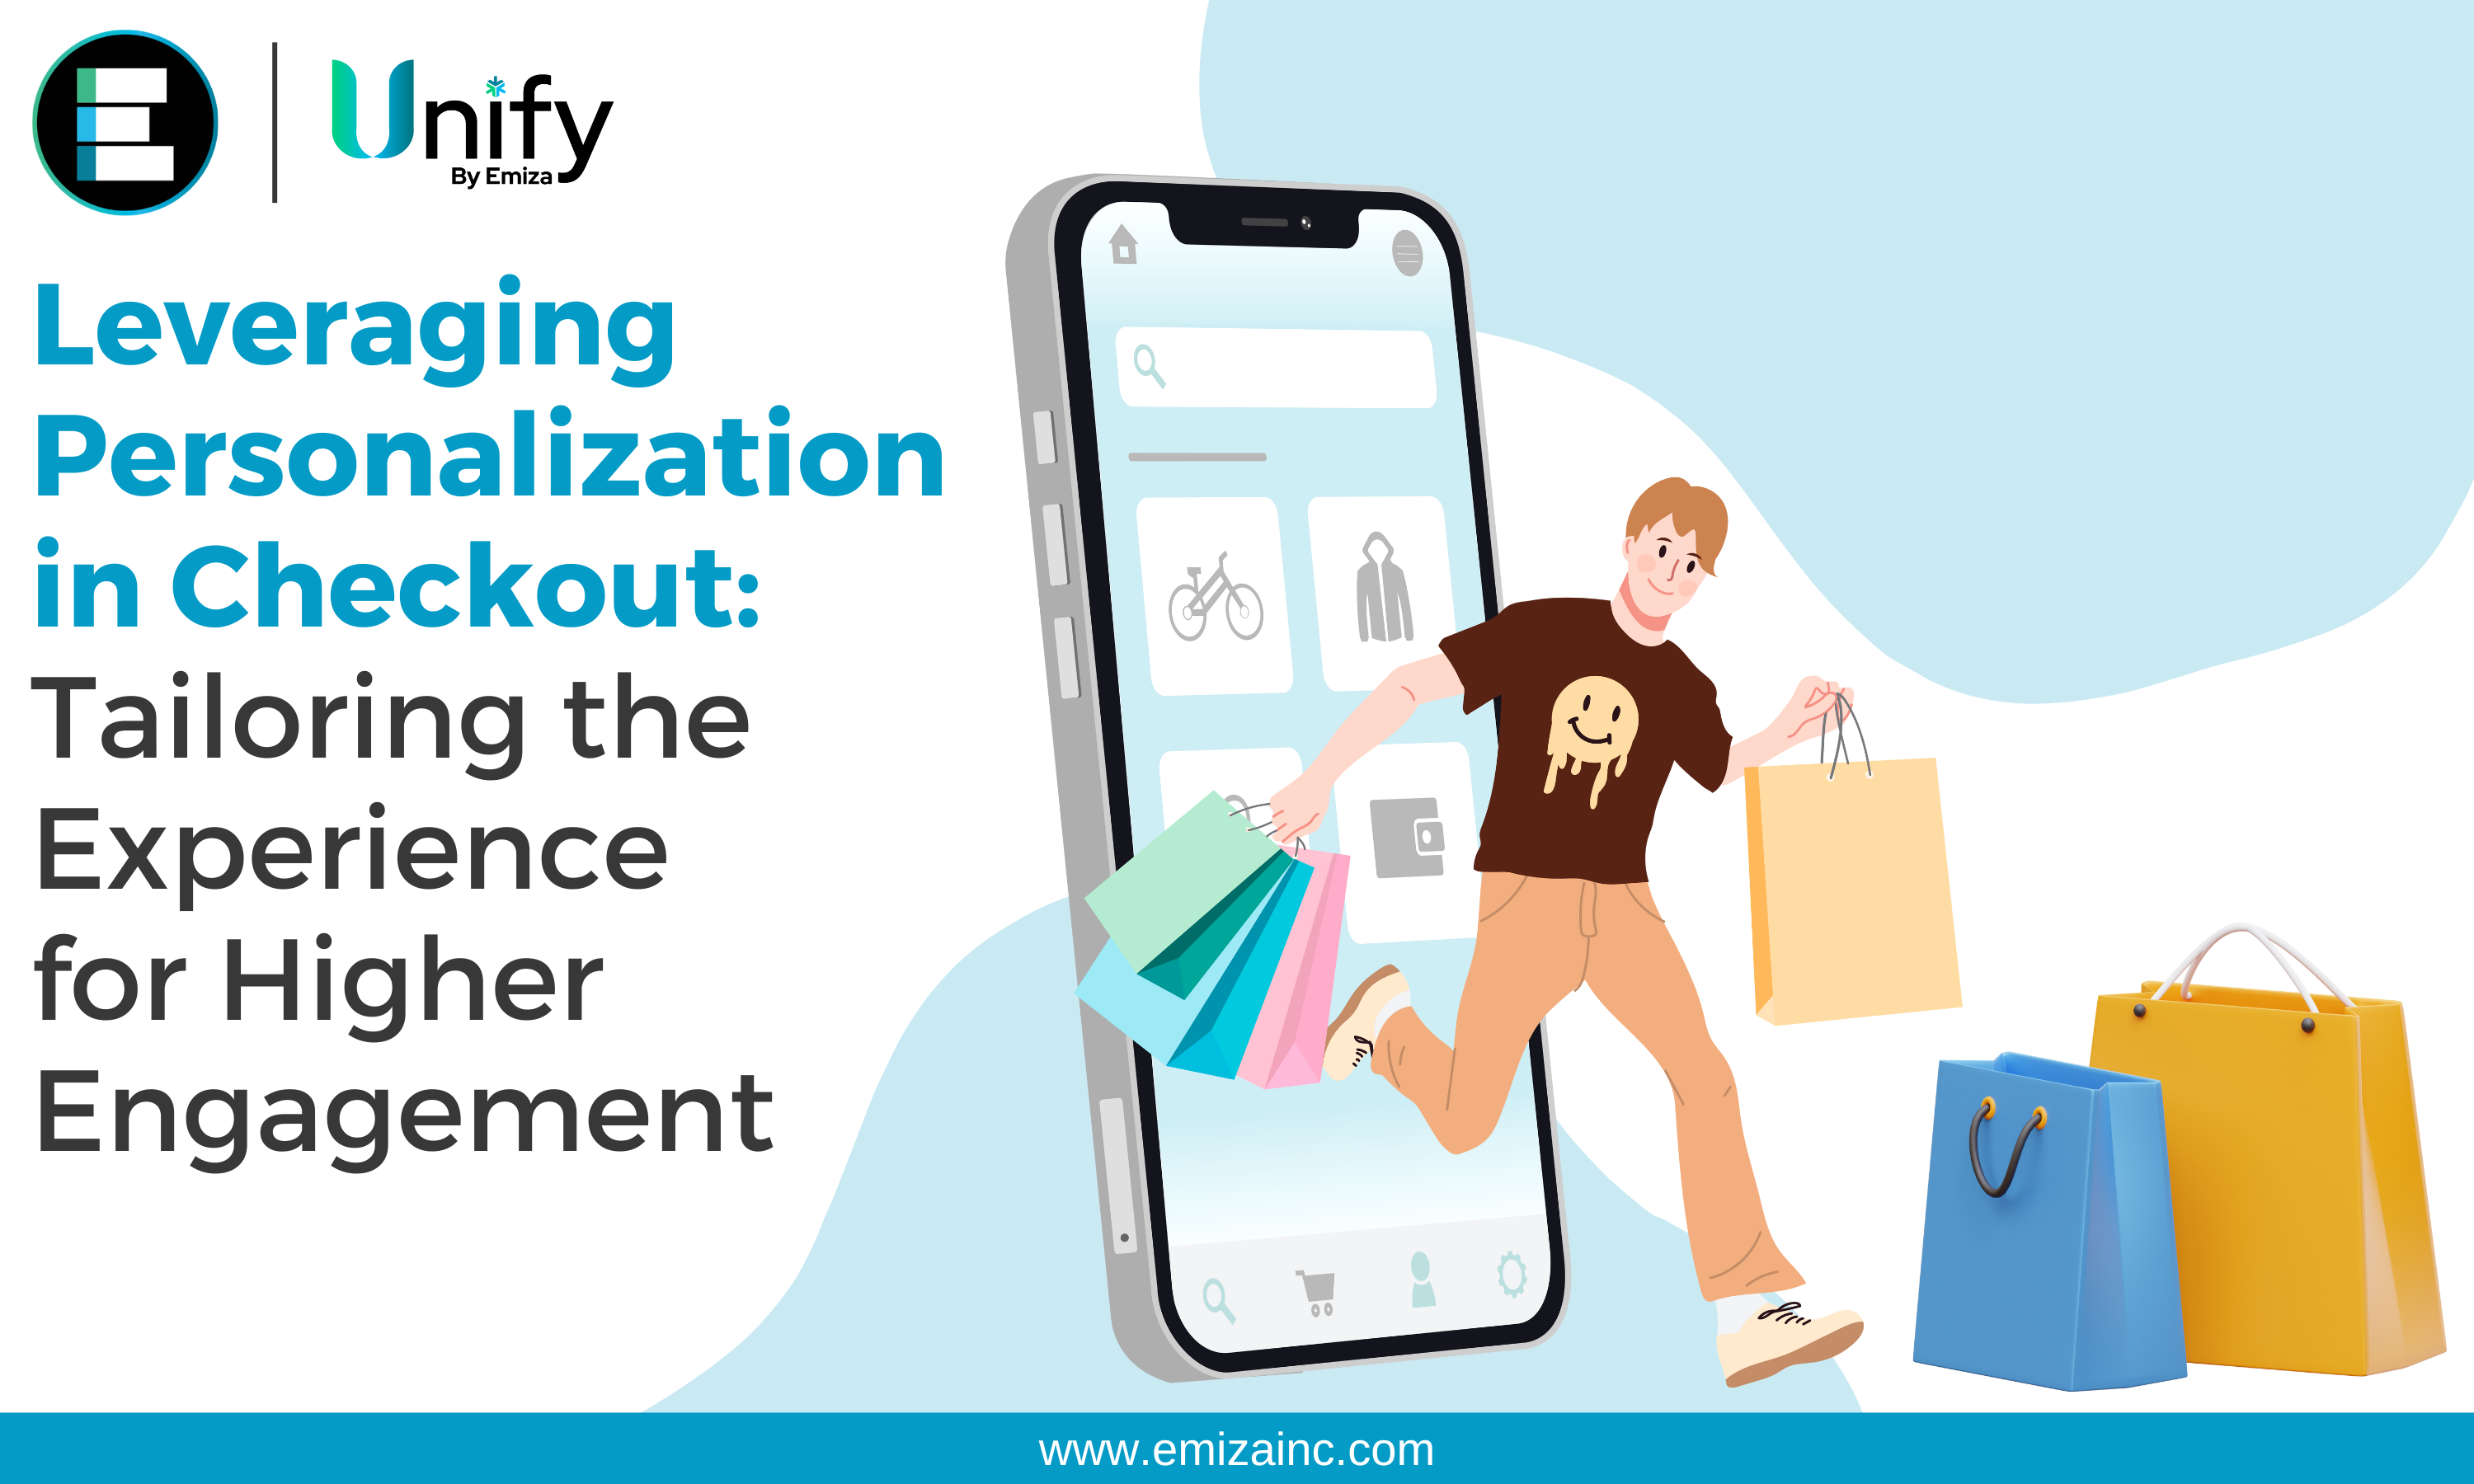 Leveraging Personalization in Checkout: Tailoring the Experience for Higher Engagement